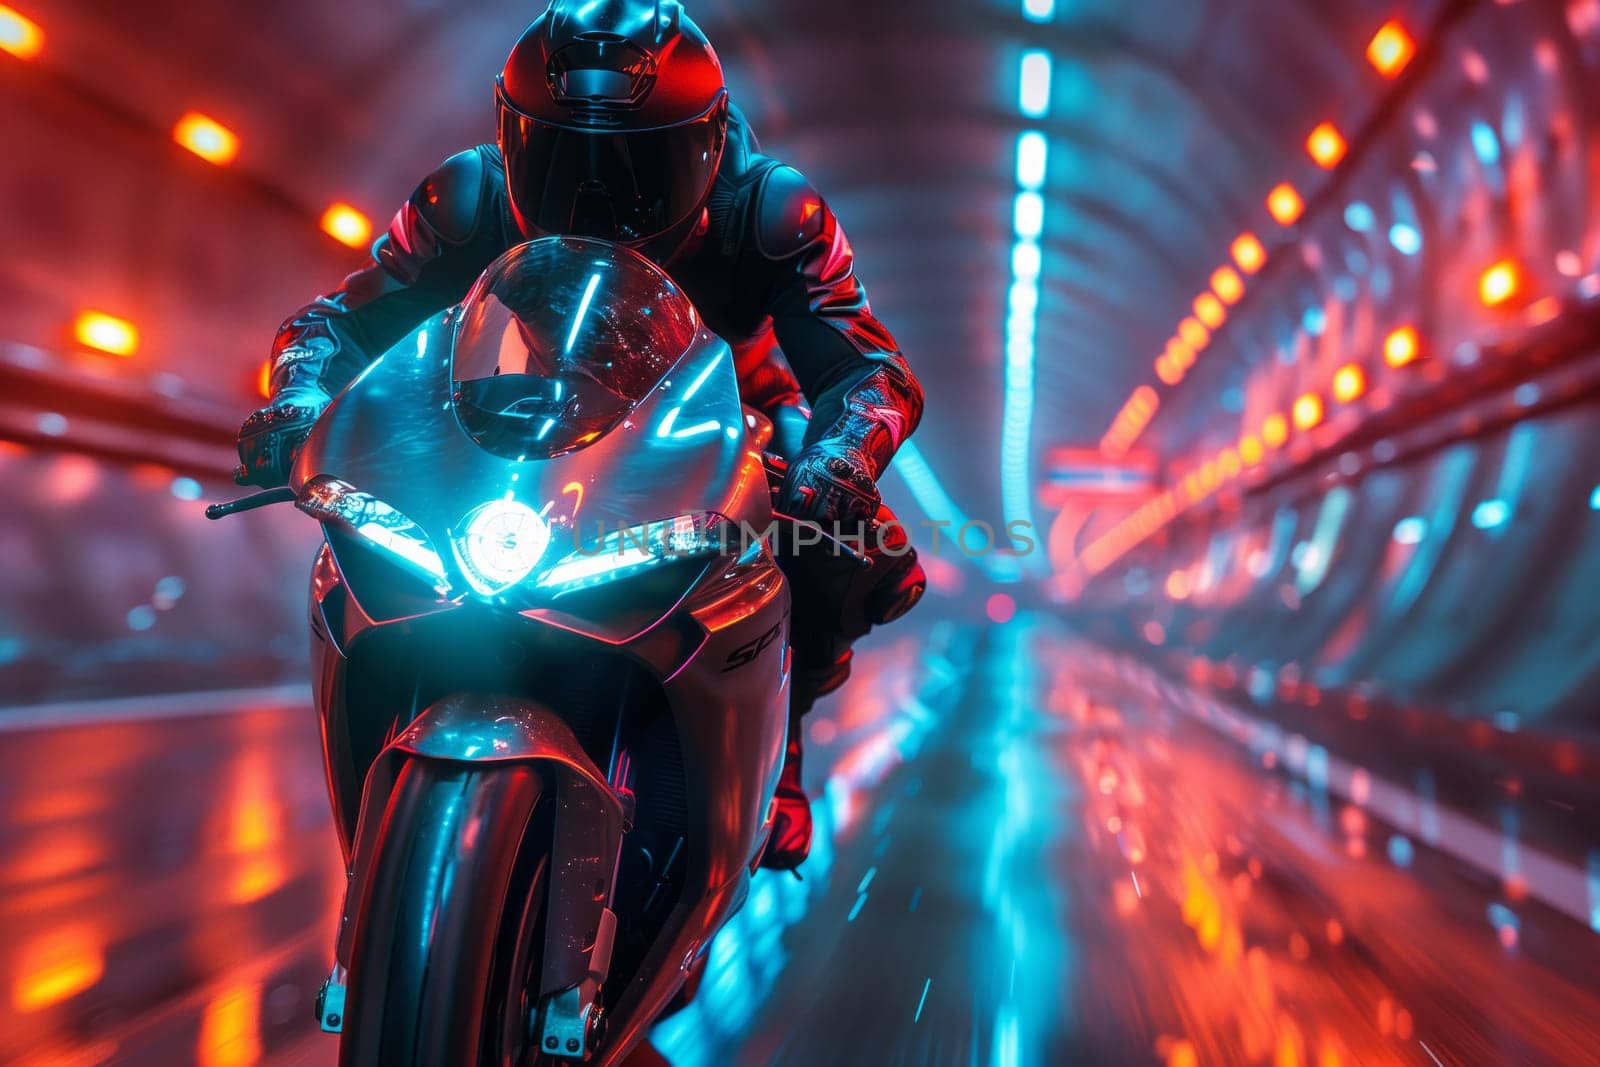 A fictional character is performing arts on a motorcycle through a dark tunnel at night, surrounded by electric blue and magenta CG artwork graphics, creating a carmine effect